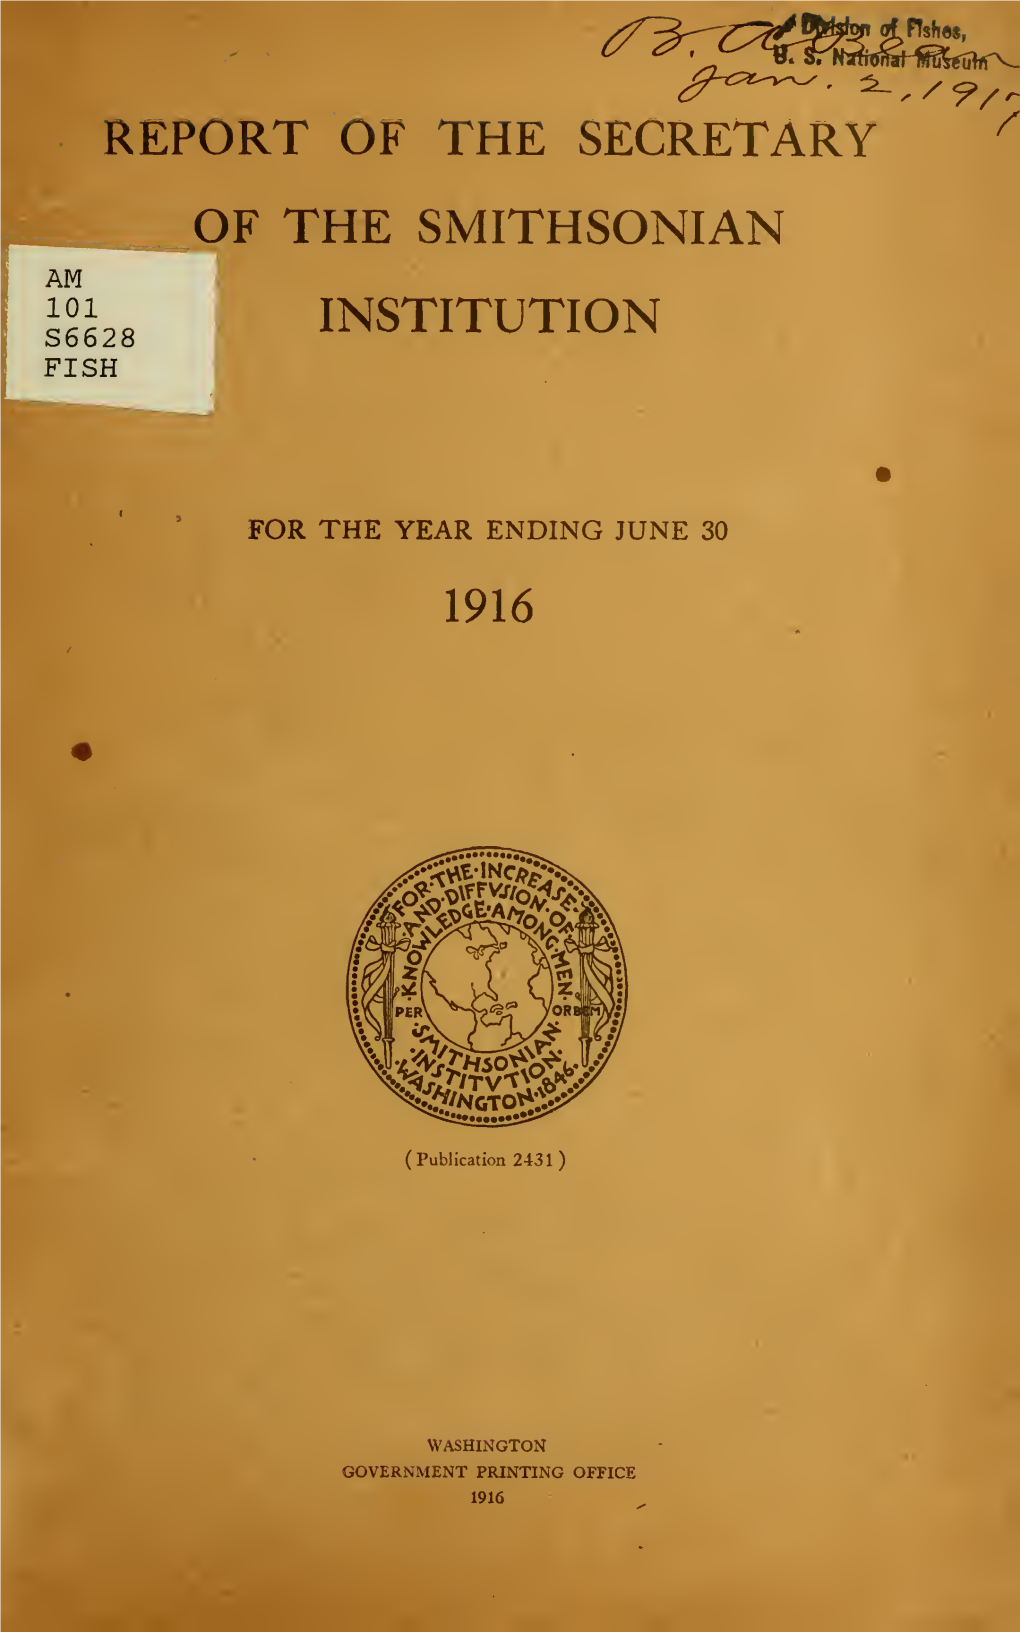 Report of the Secretary of the Smithsonian Institution